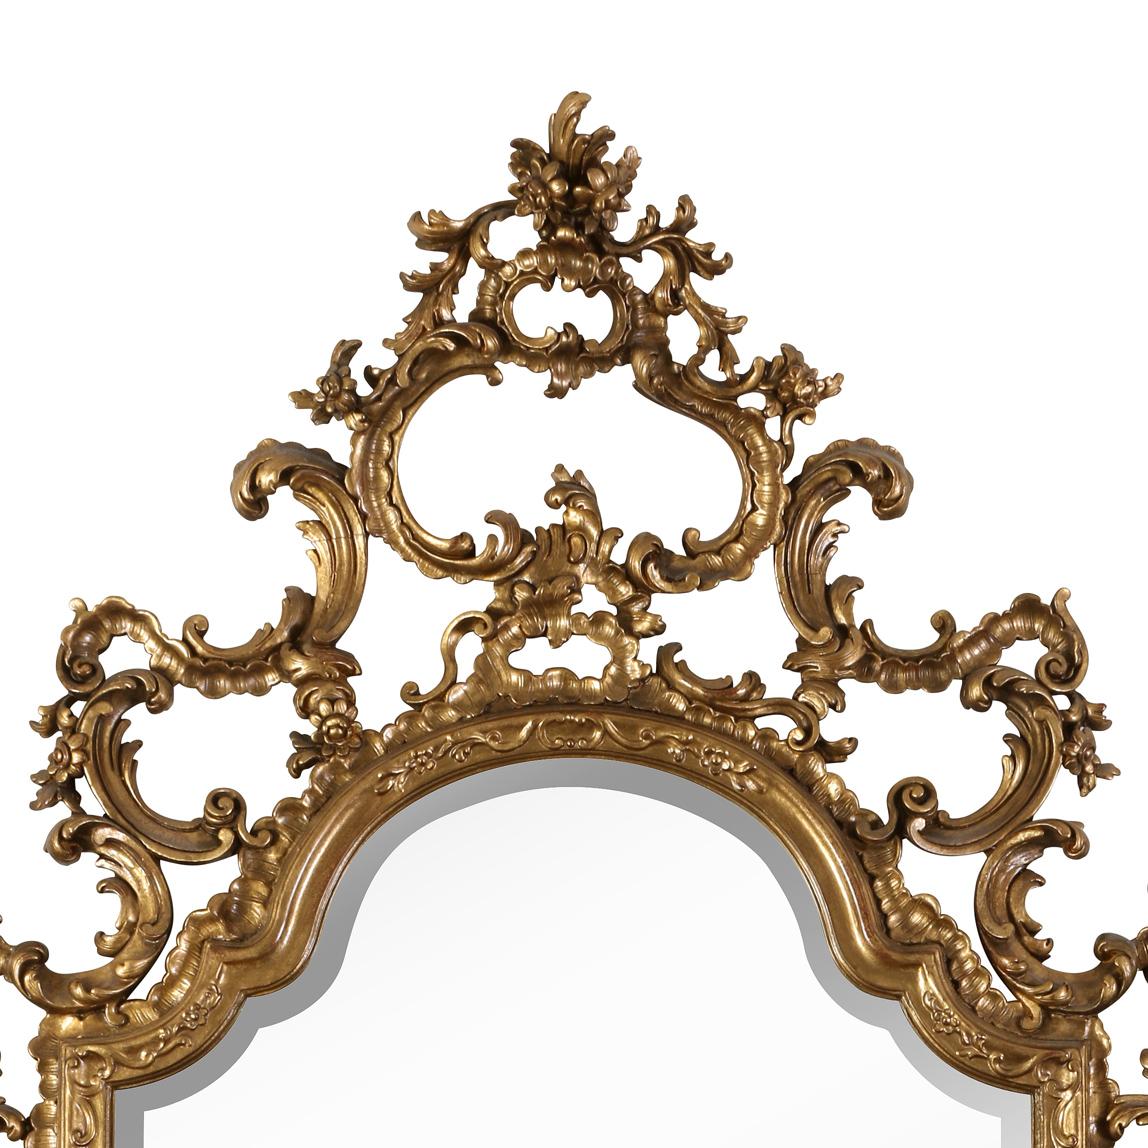 A large scale French rococo style mirror with ornate gilt detail. Carved scroll, leaf and floral design decorate the mirror border. The mirror itself has an arched shape at top and square corners at the base. The open work, carved and gilt frame has